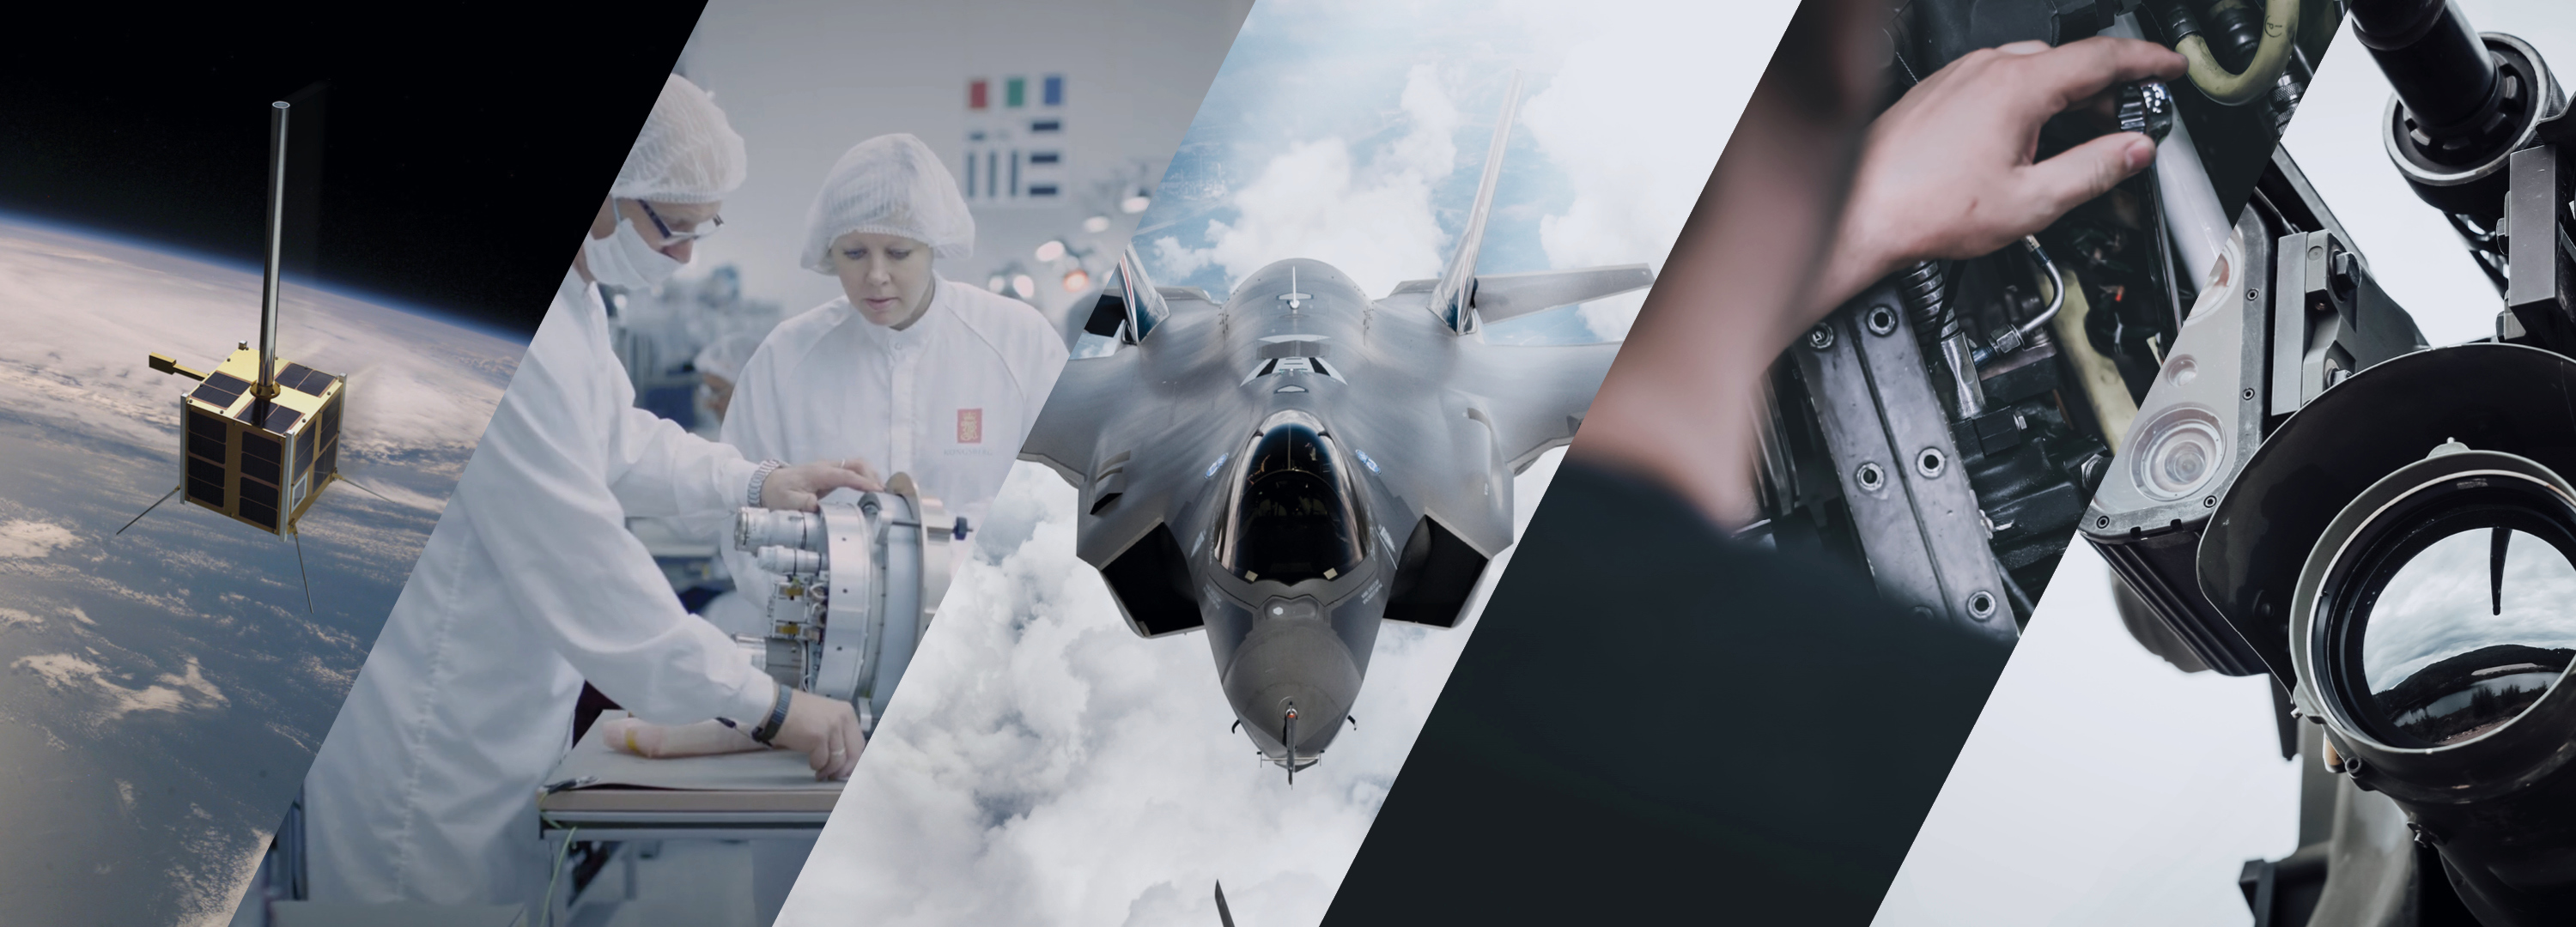 Cover photo for Kongsberg Defence & Aerospace, showing satellites, fighter jets, engineers, and a remote weapon system.